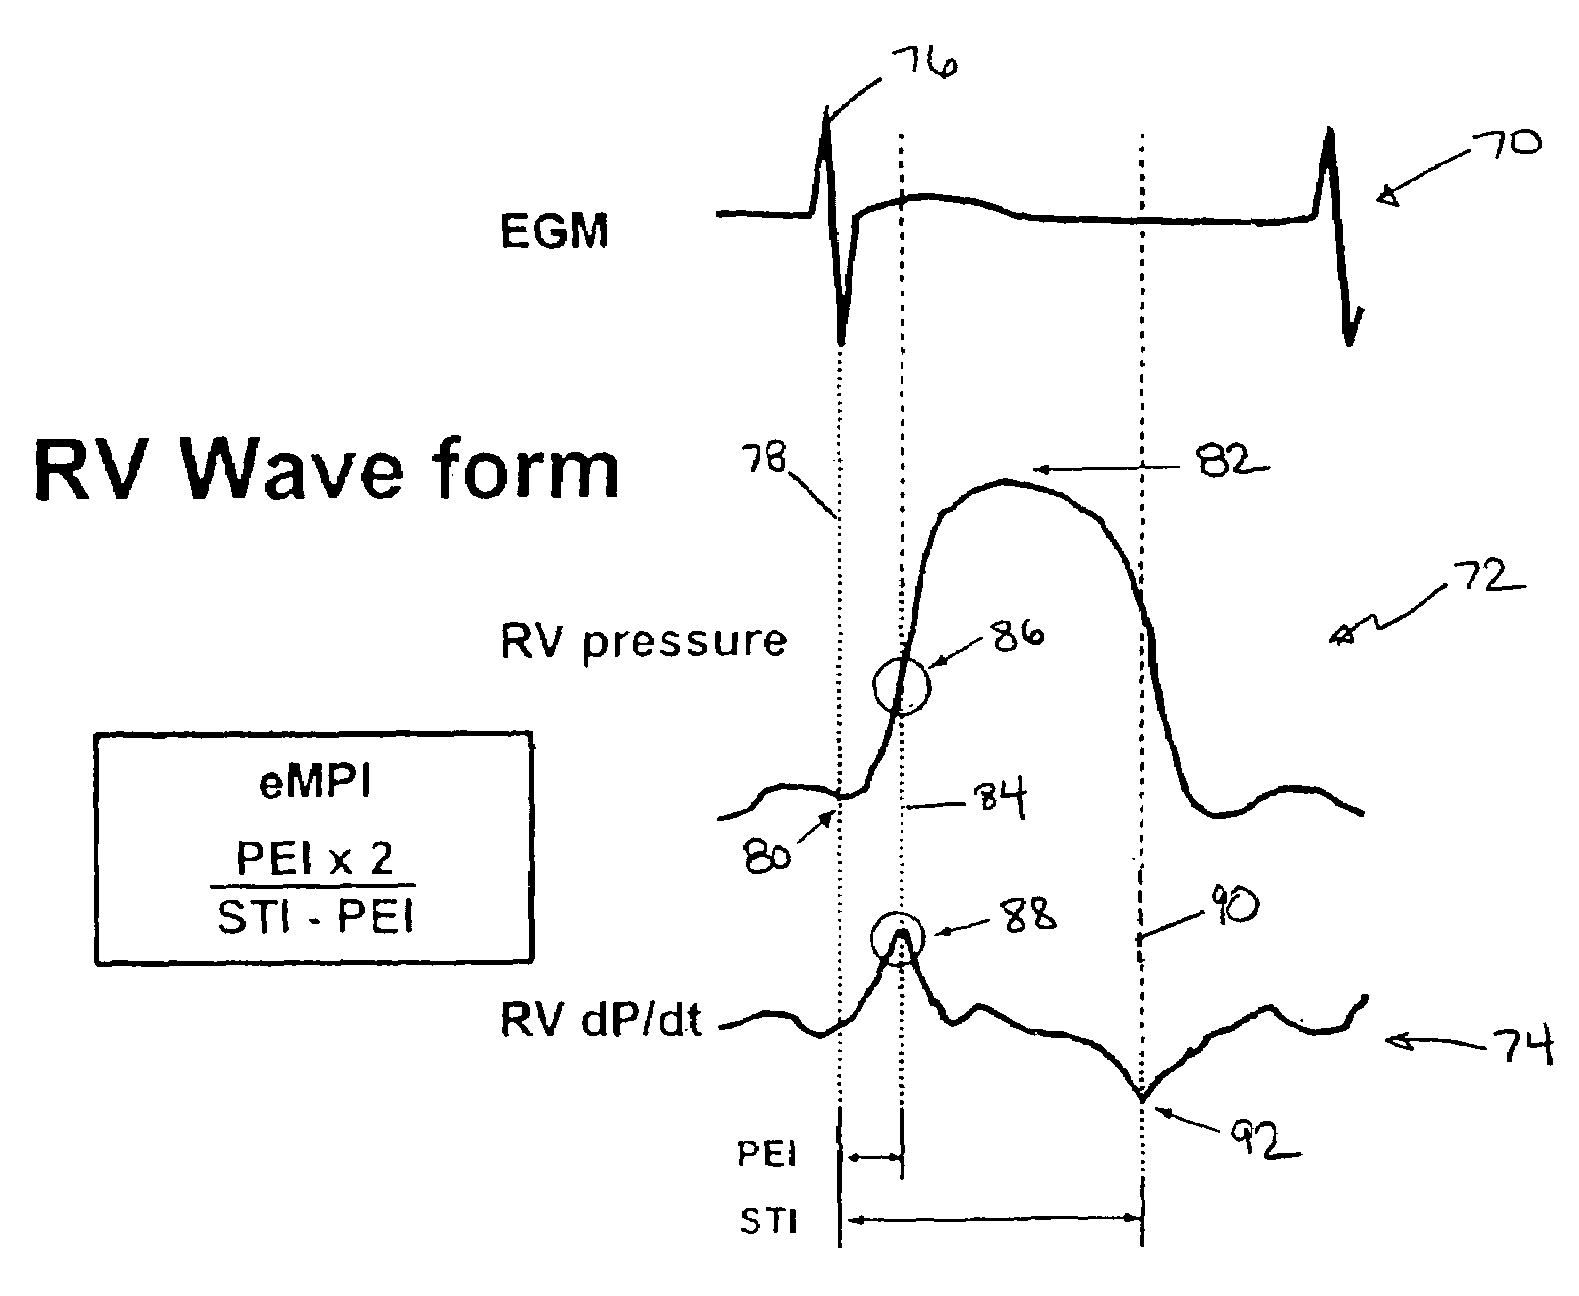 System and method for monitoring myocardial performance using sensed ventricular pressures